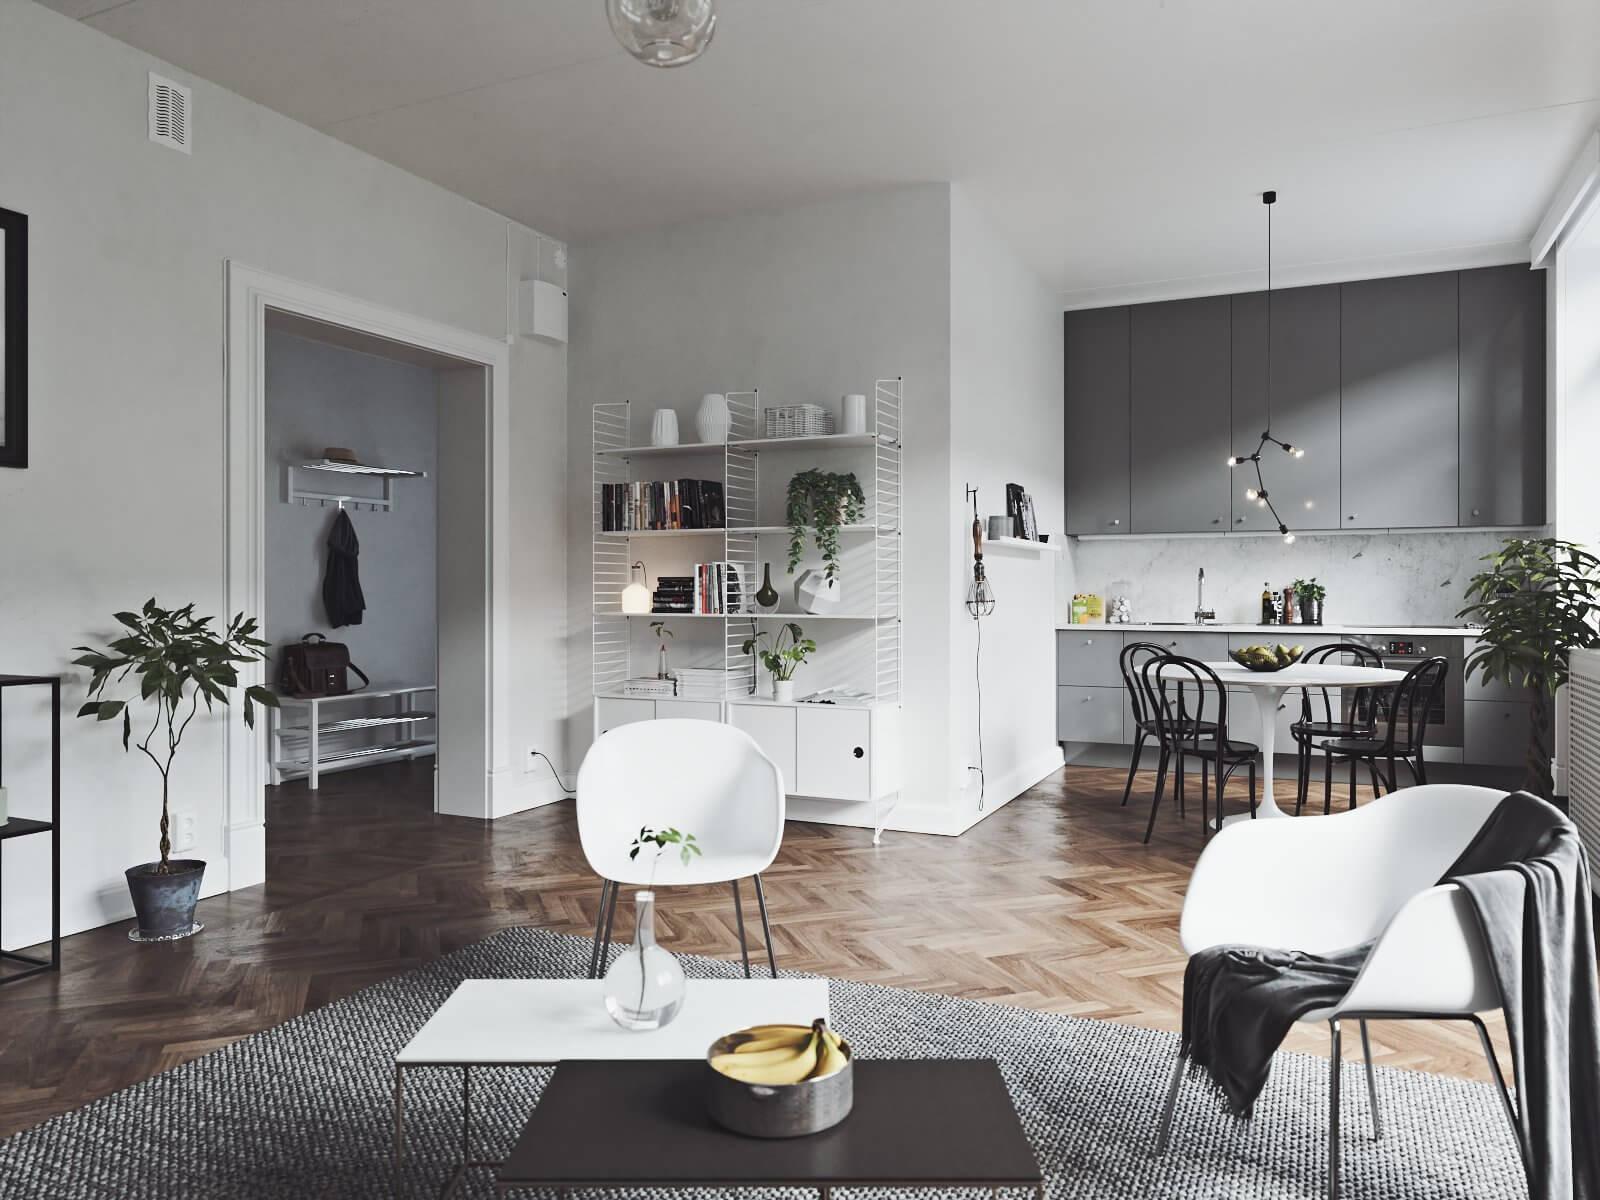 A modern living room and kitchen combo - Scandinavian style